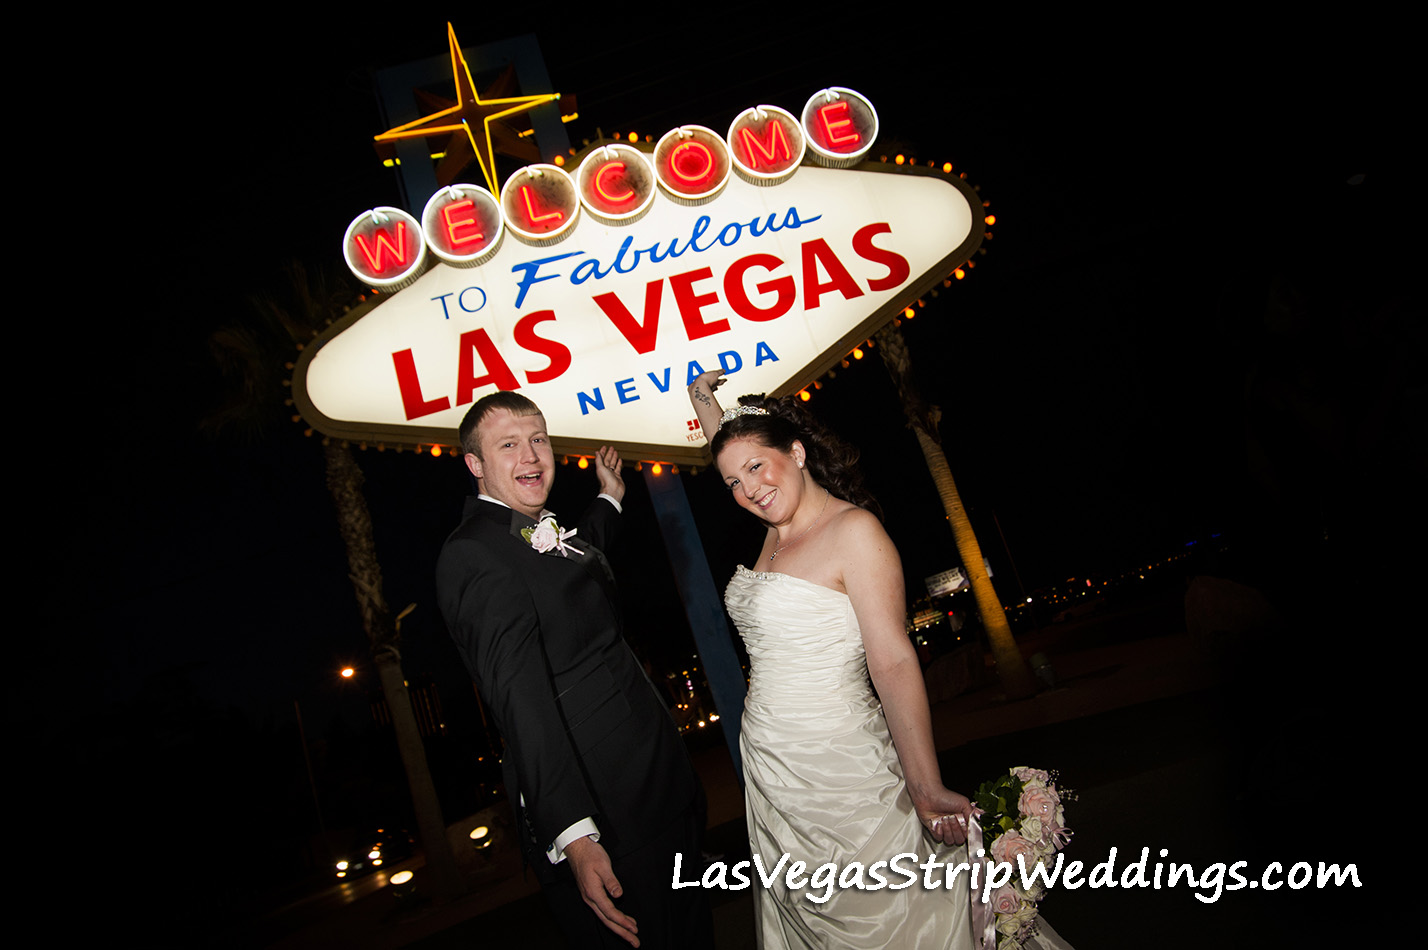 Welcome to Vegas Sign Wedding Packages